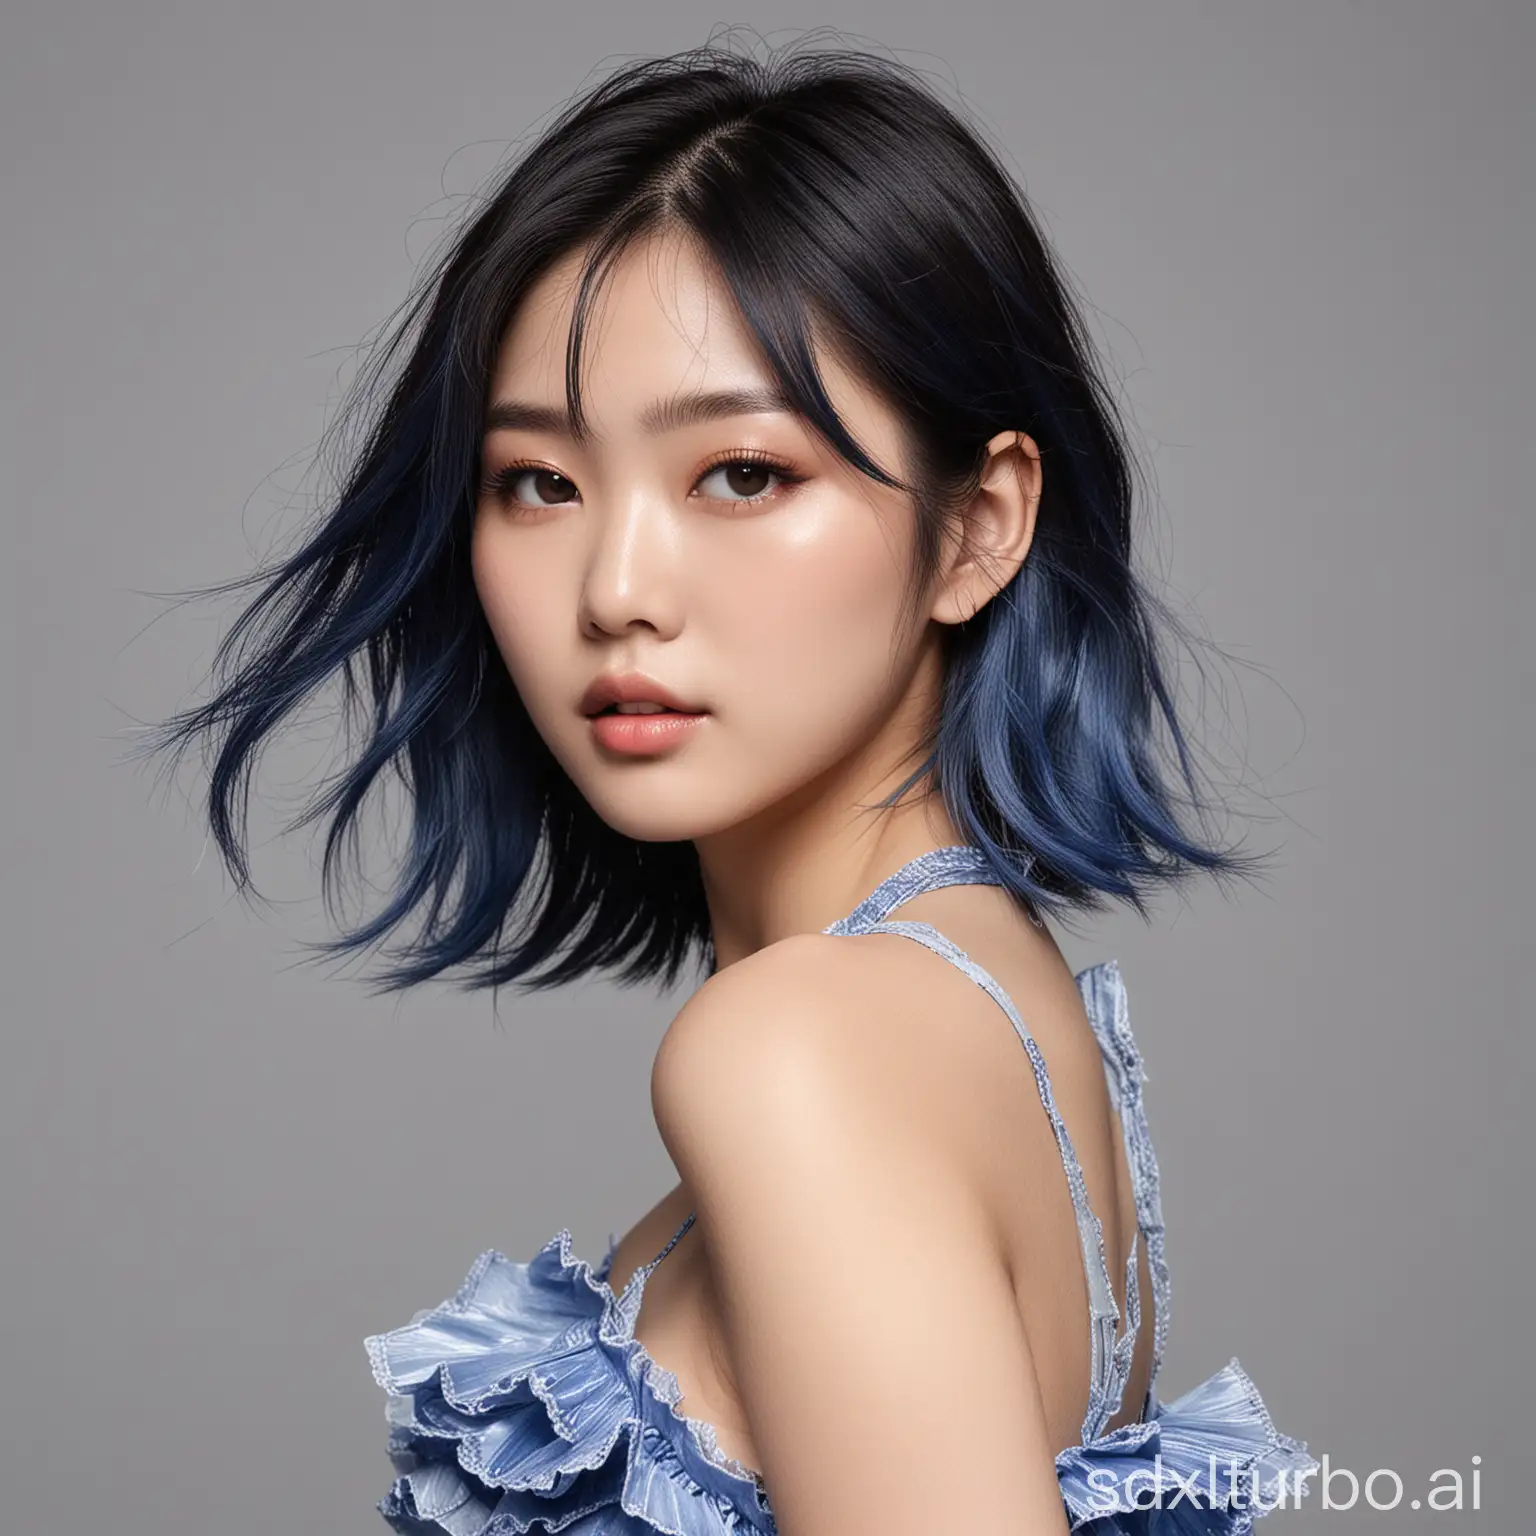 Half-length photo of a Japanese and Korean model wearing blue blush and highlights